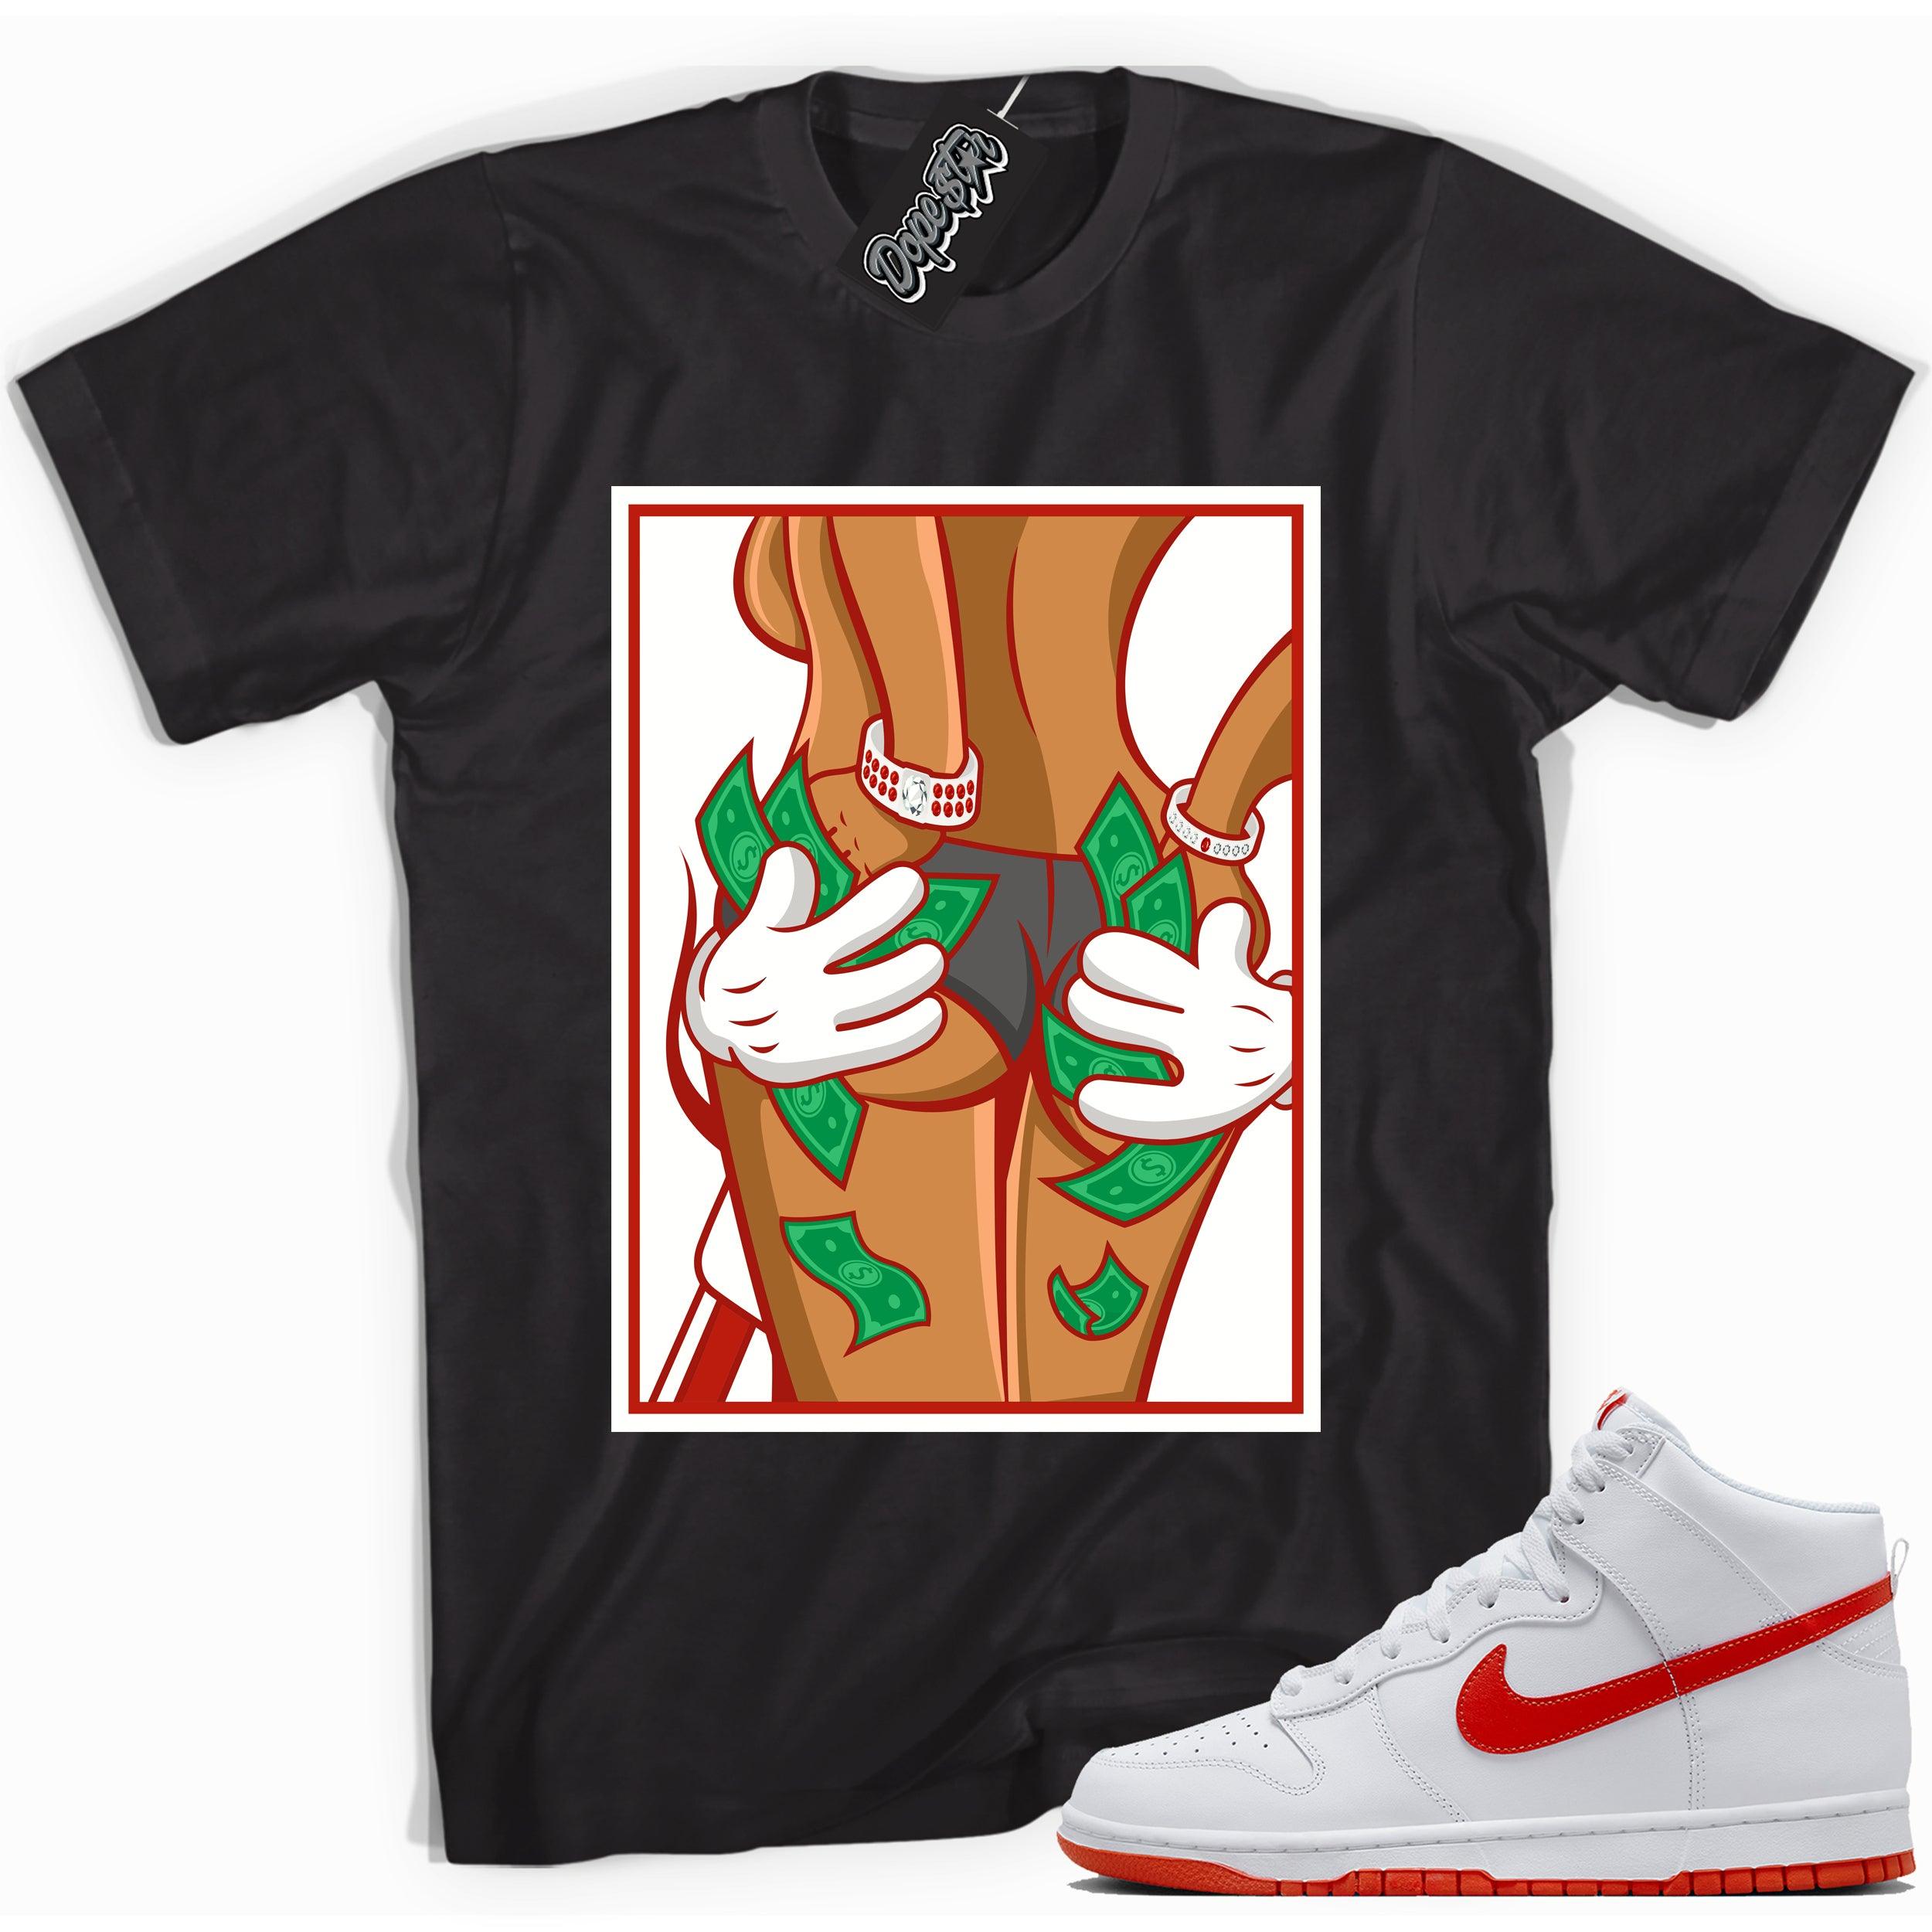 Cool black graphic tee with 'got my hands full money hands' print, that perfectly matches Nike Dunk High White Picante Red sneakers.